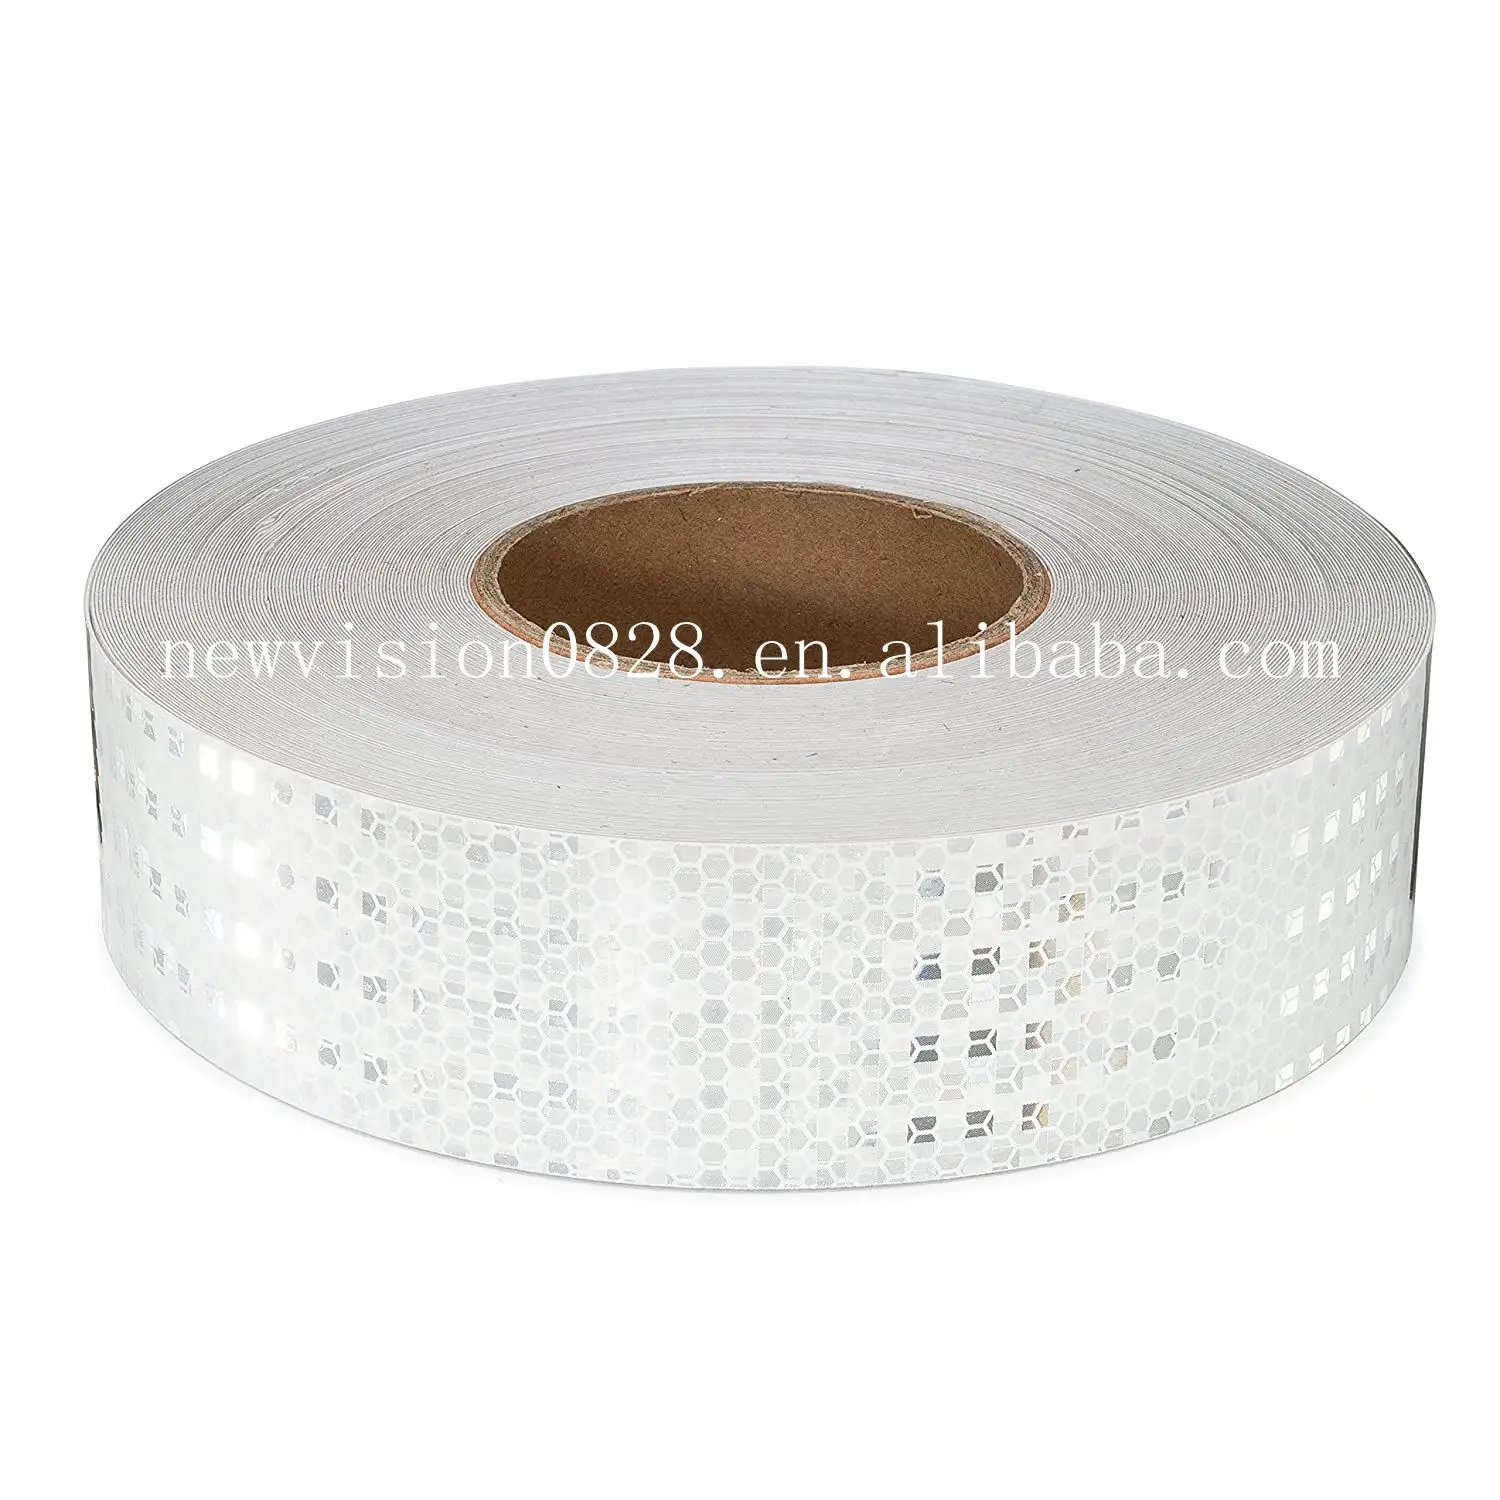 High quality Resistant Waterpr White Grade Reflective High Visibility Safety Reflective Tape For Bus Truck Trailer BoatDOT-C2